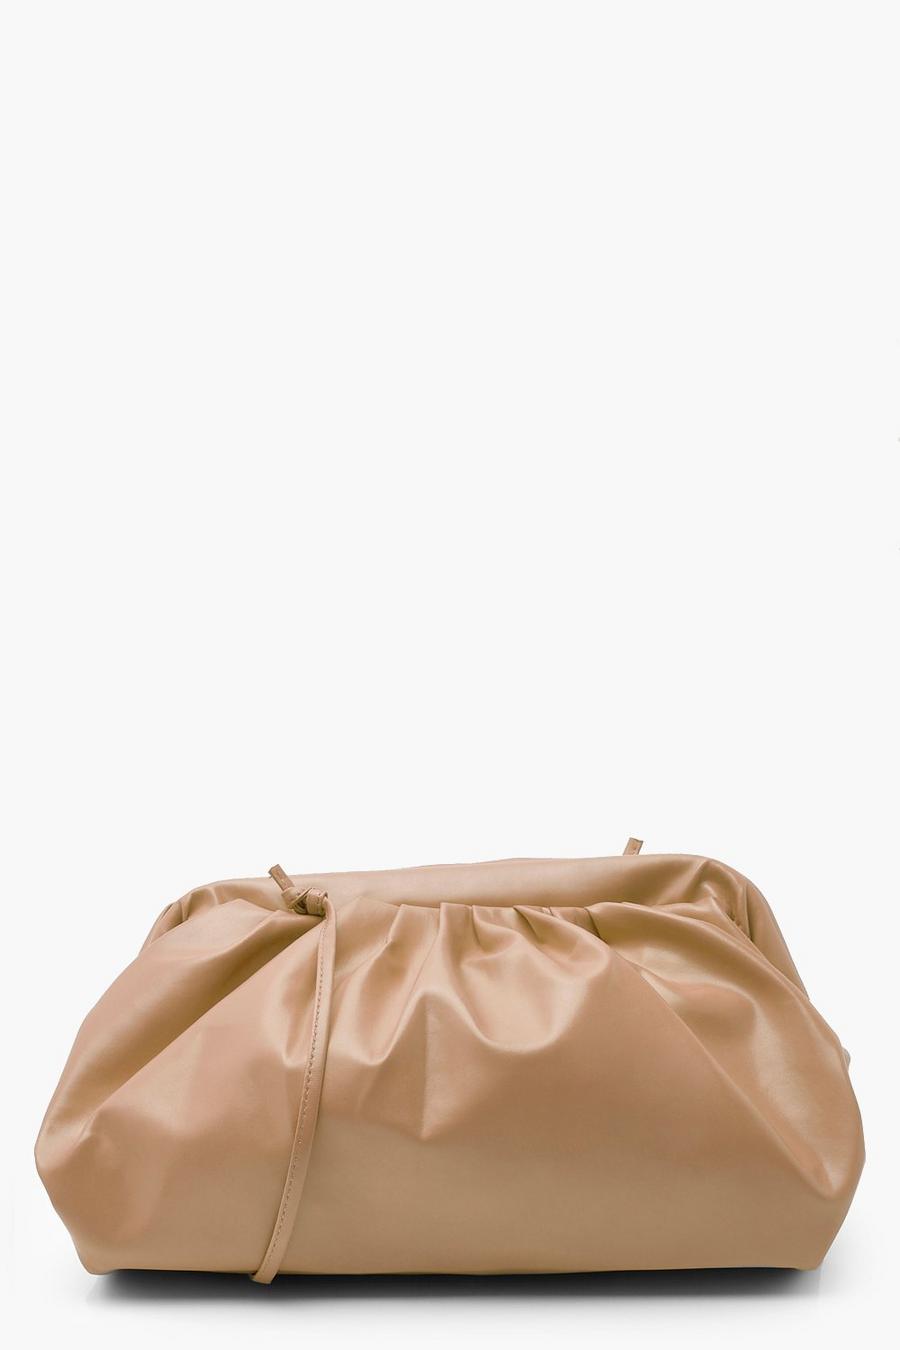 Camel Slouchy Oversized PU Clutch & Strap Bag image number 1